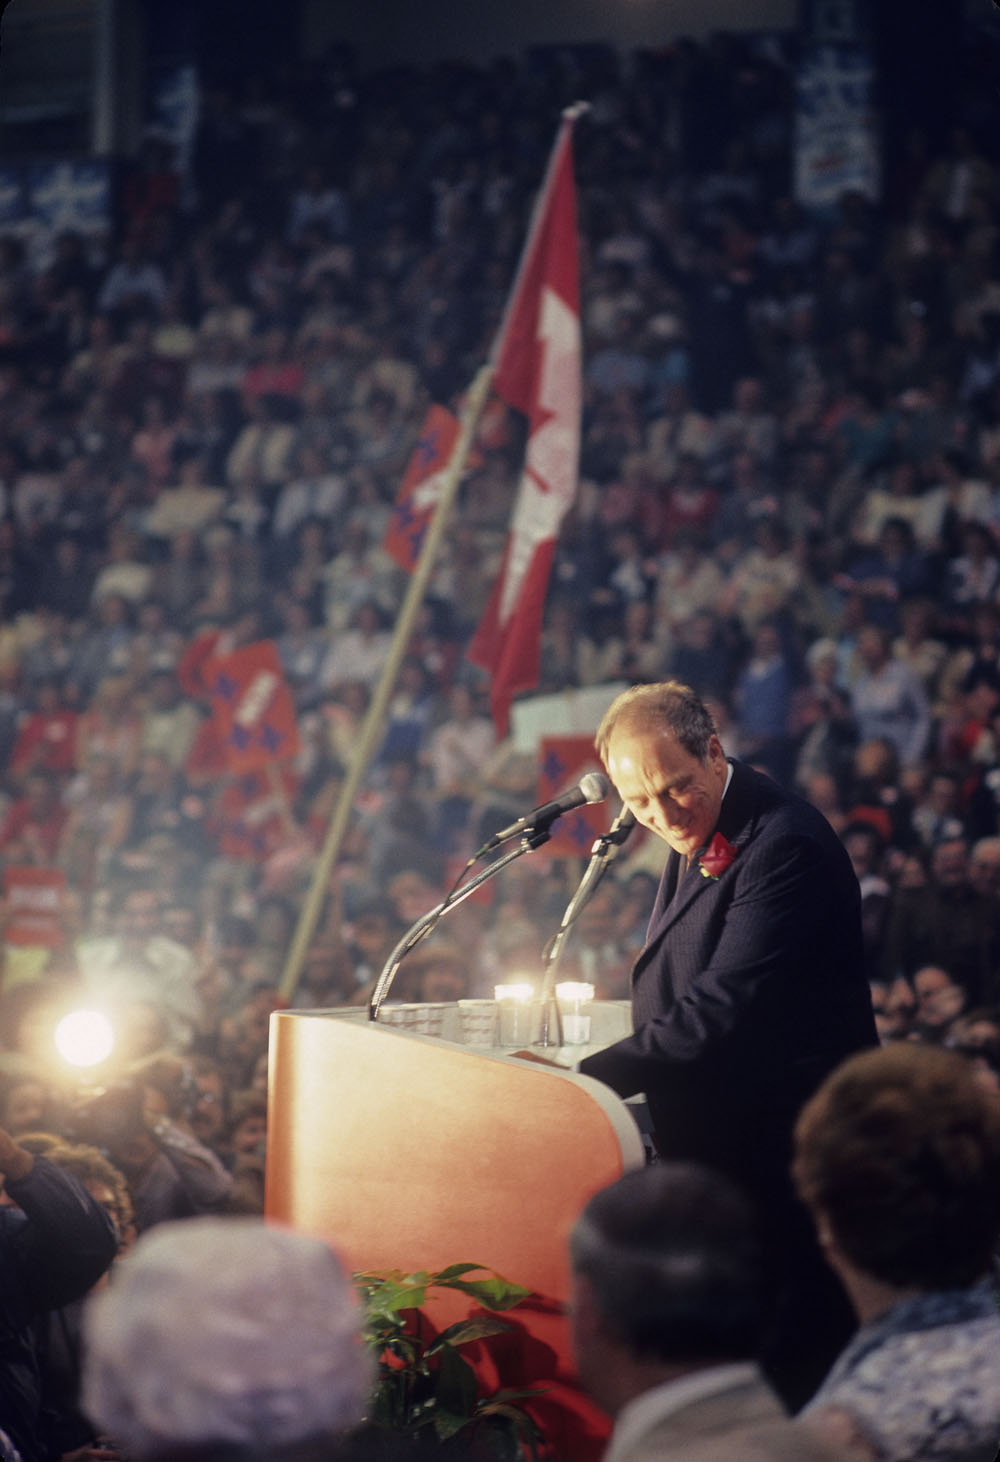 A man standing at a podium ducks his head, smiling. He speaks to a huge crowd.